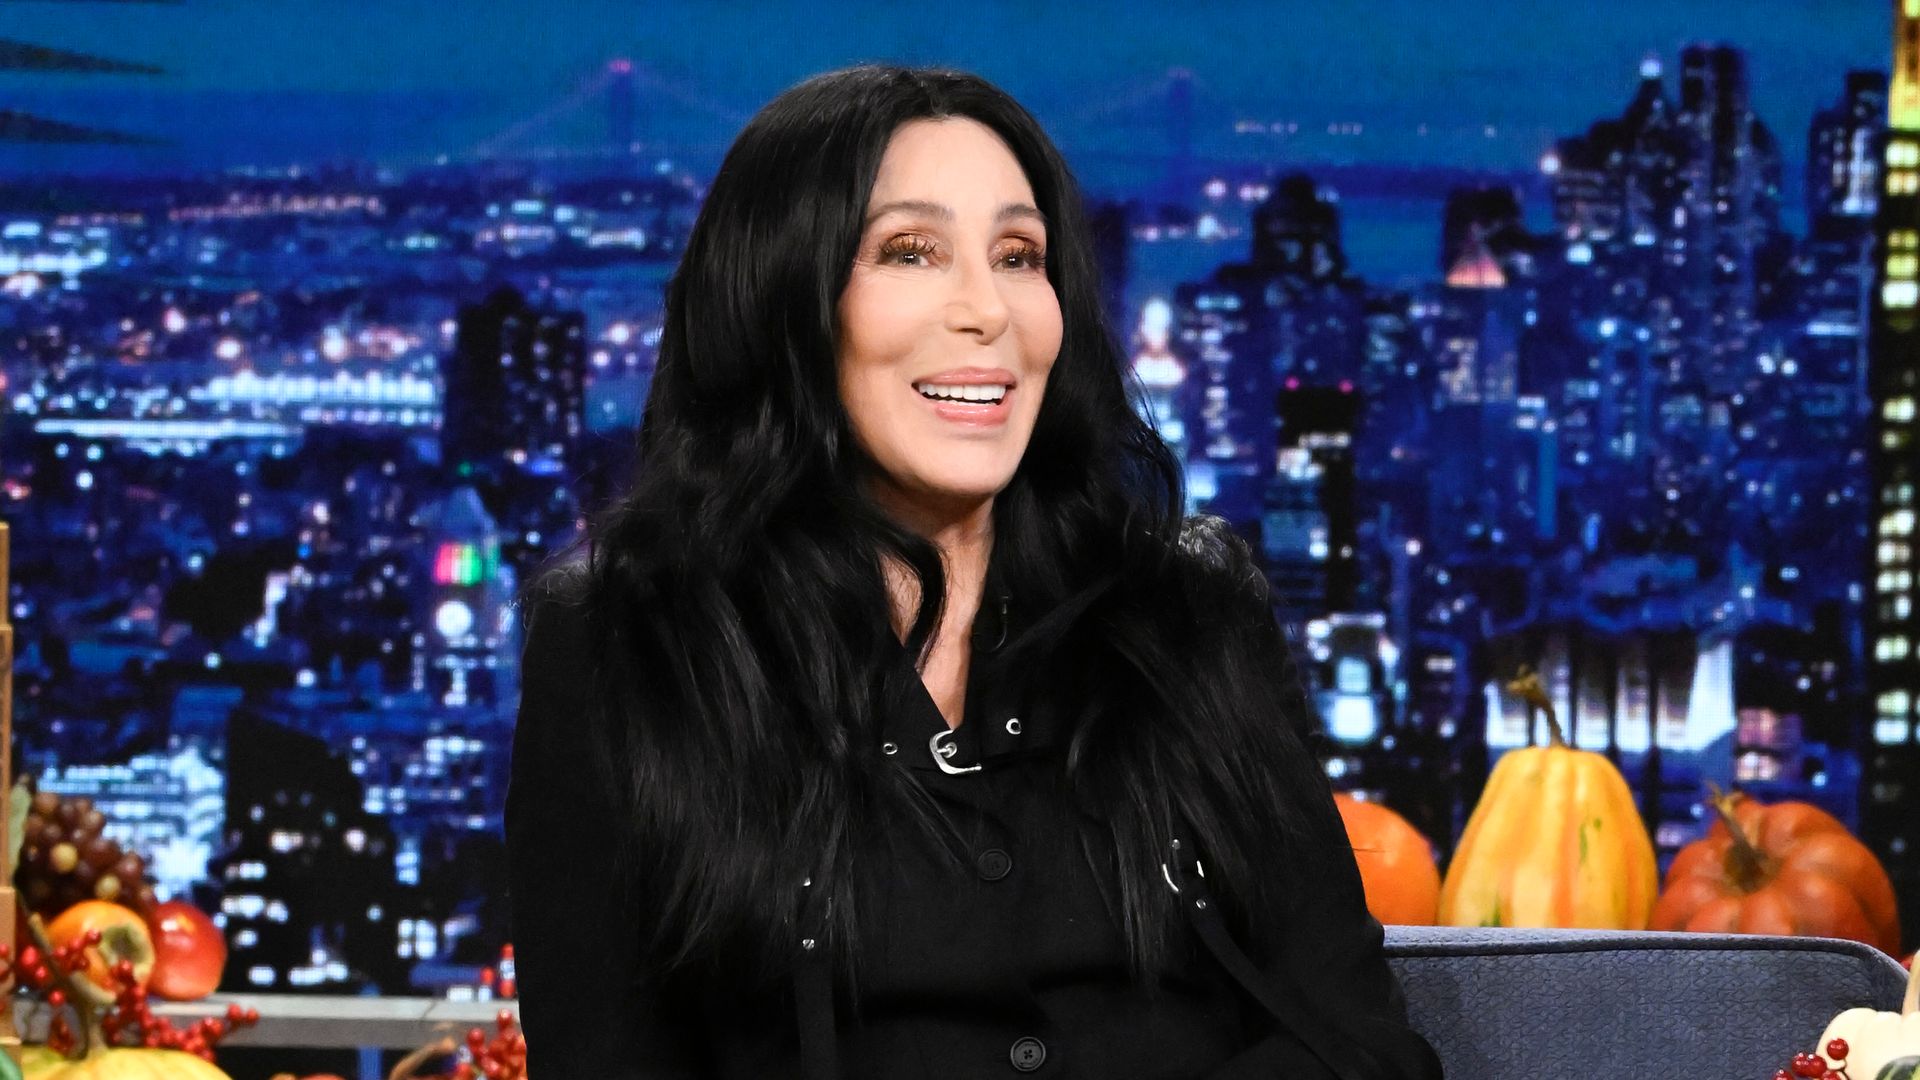 Singer Cher during an interview with Jimmy Fallon